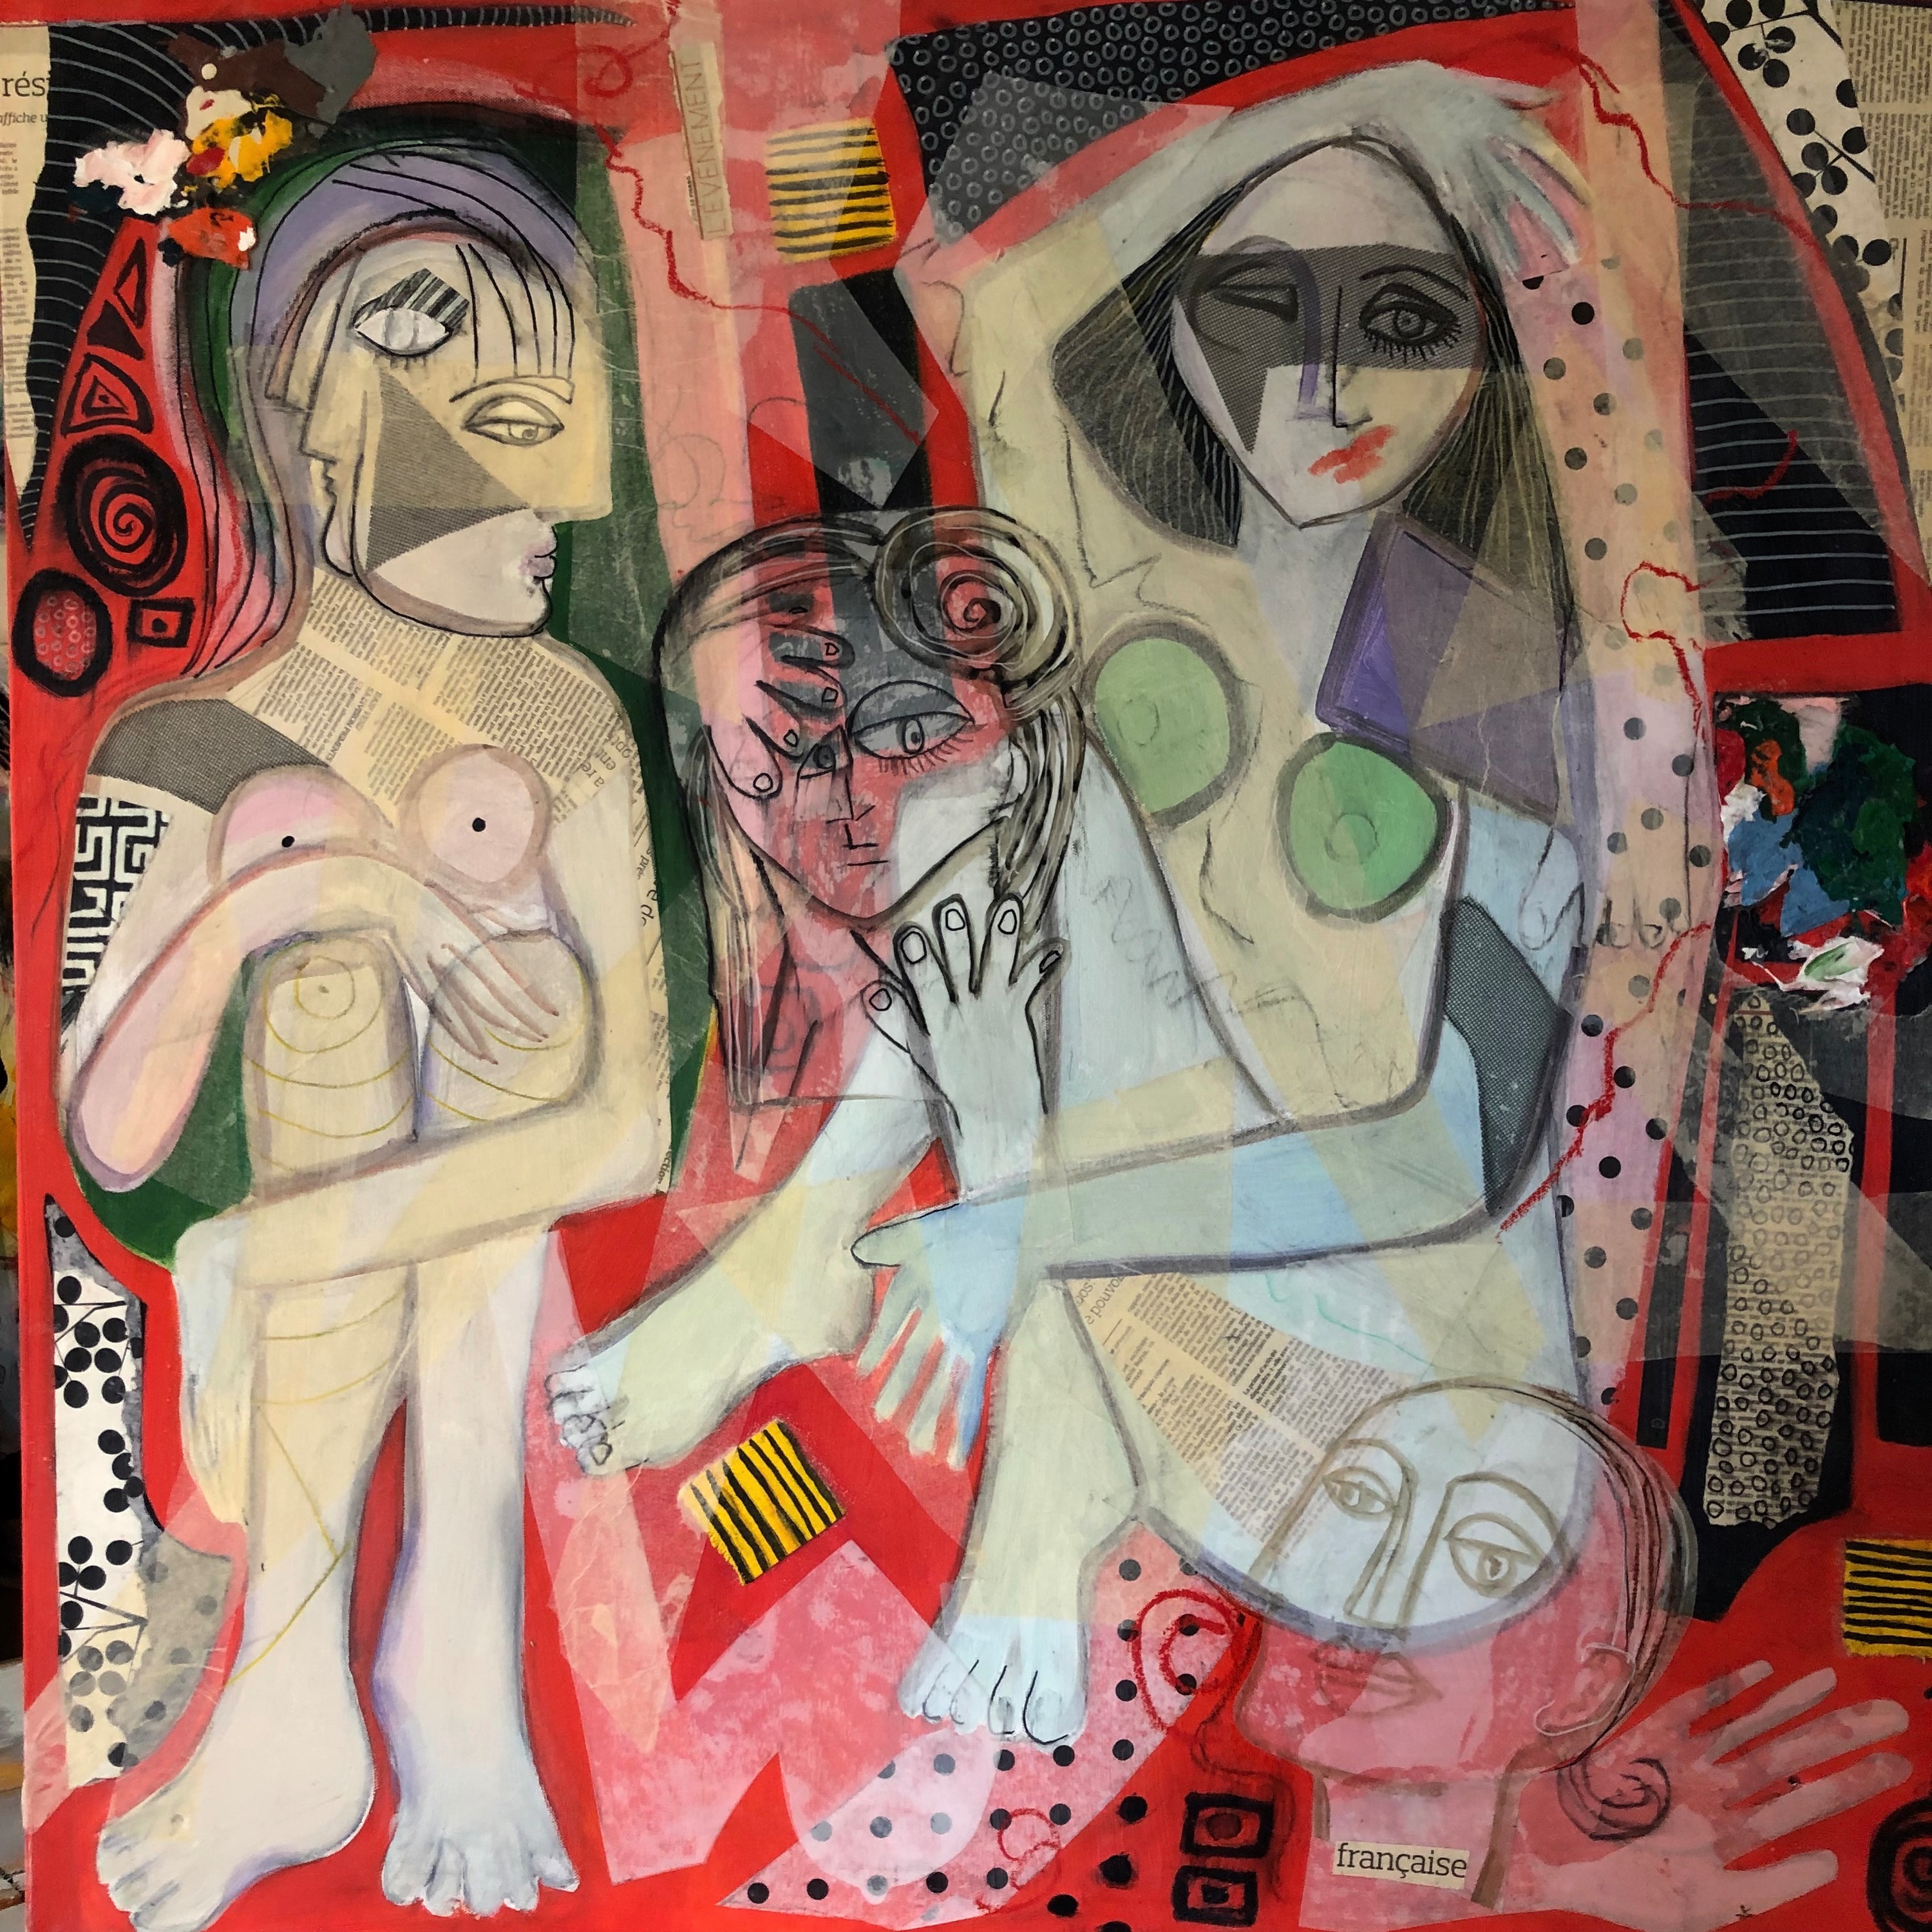 Deveuve alexis spa day 36 22 x 36 22  mixed media and collage on canvas qxnbr6